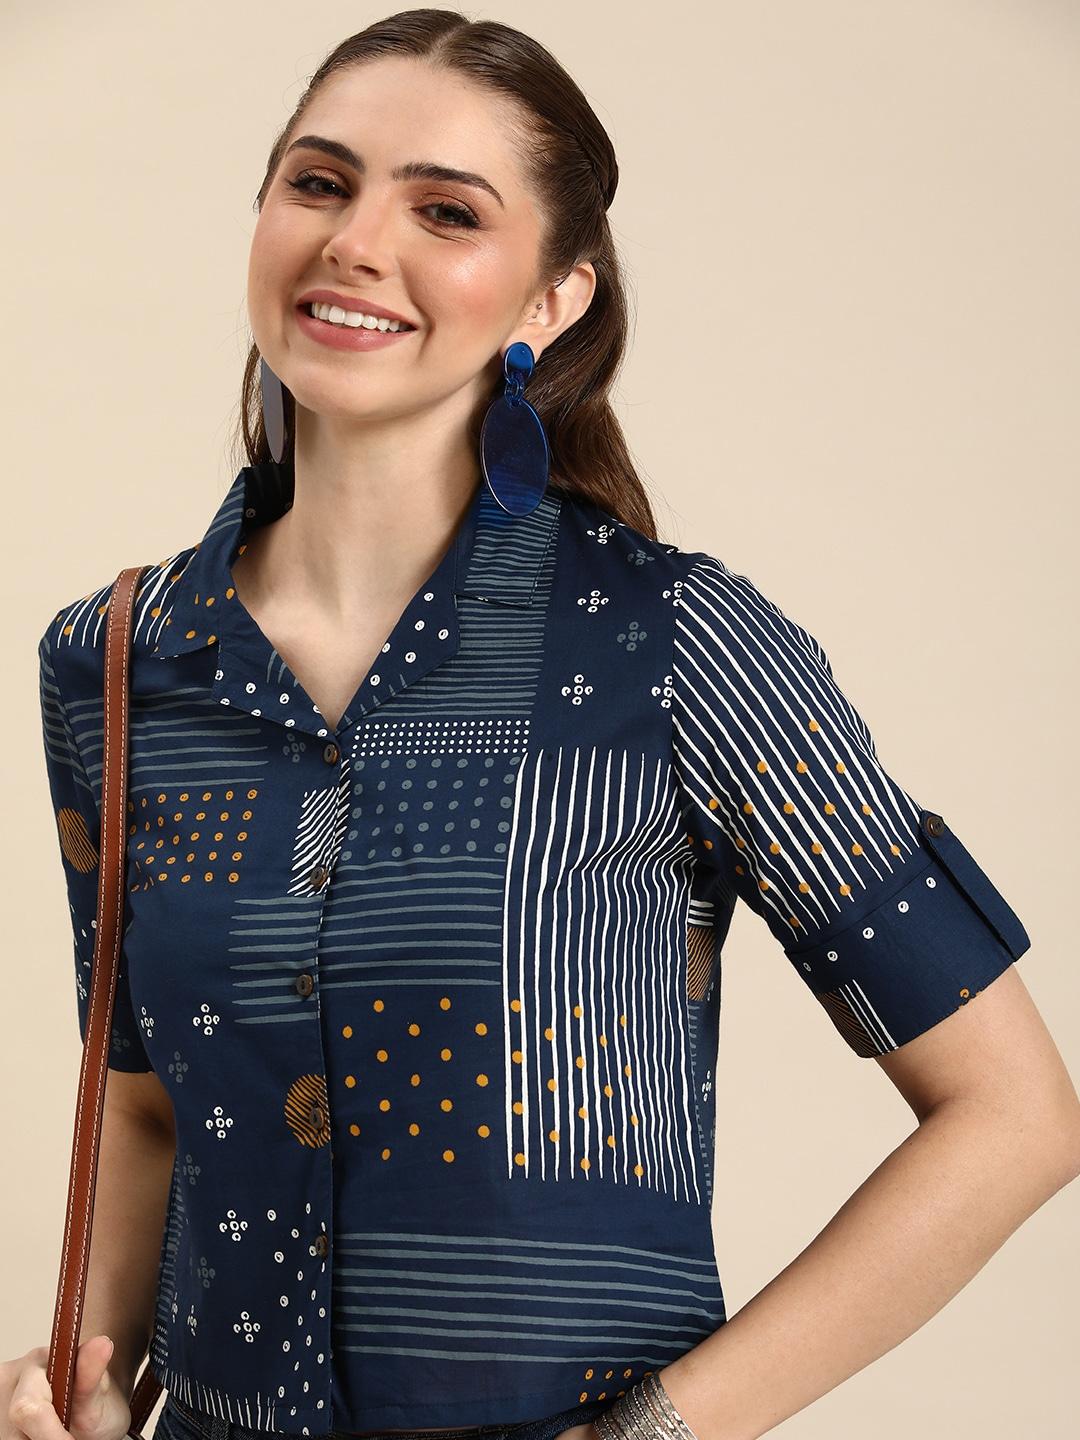 anouk-geometric-print-roll-up-sleeves-cotton-shirt-style-crop-top